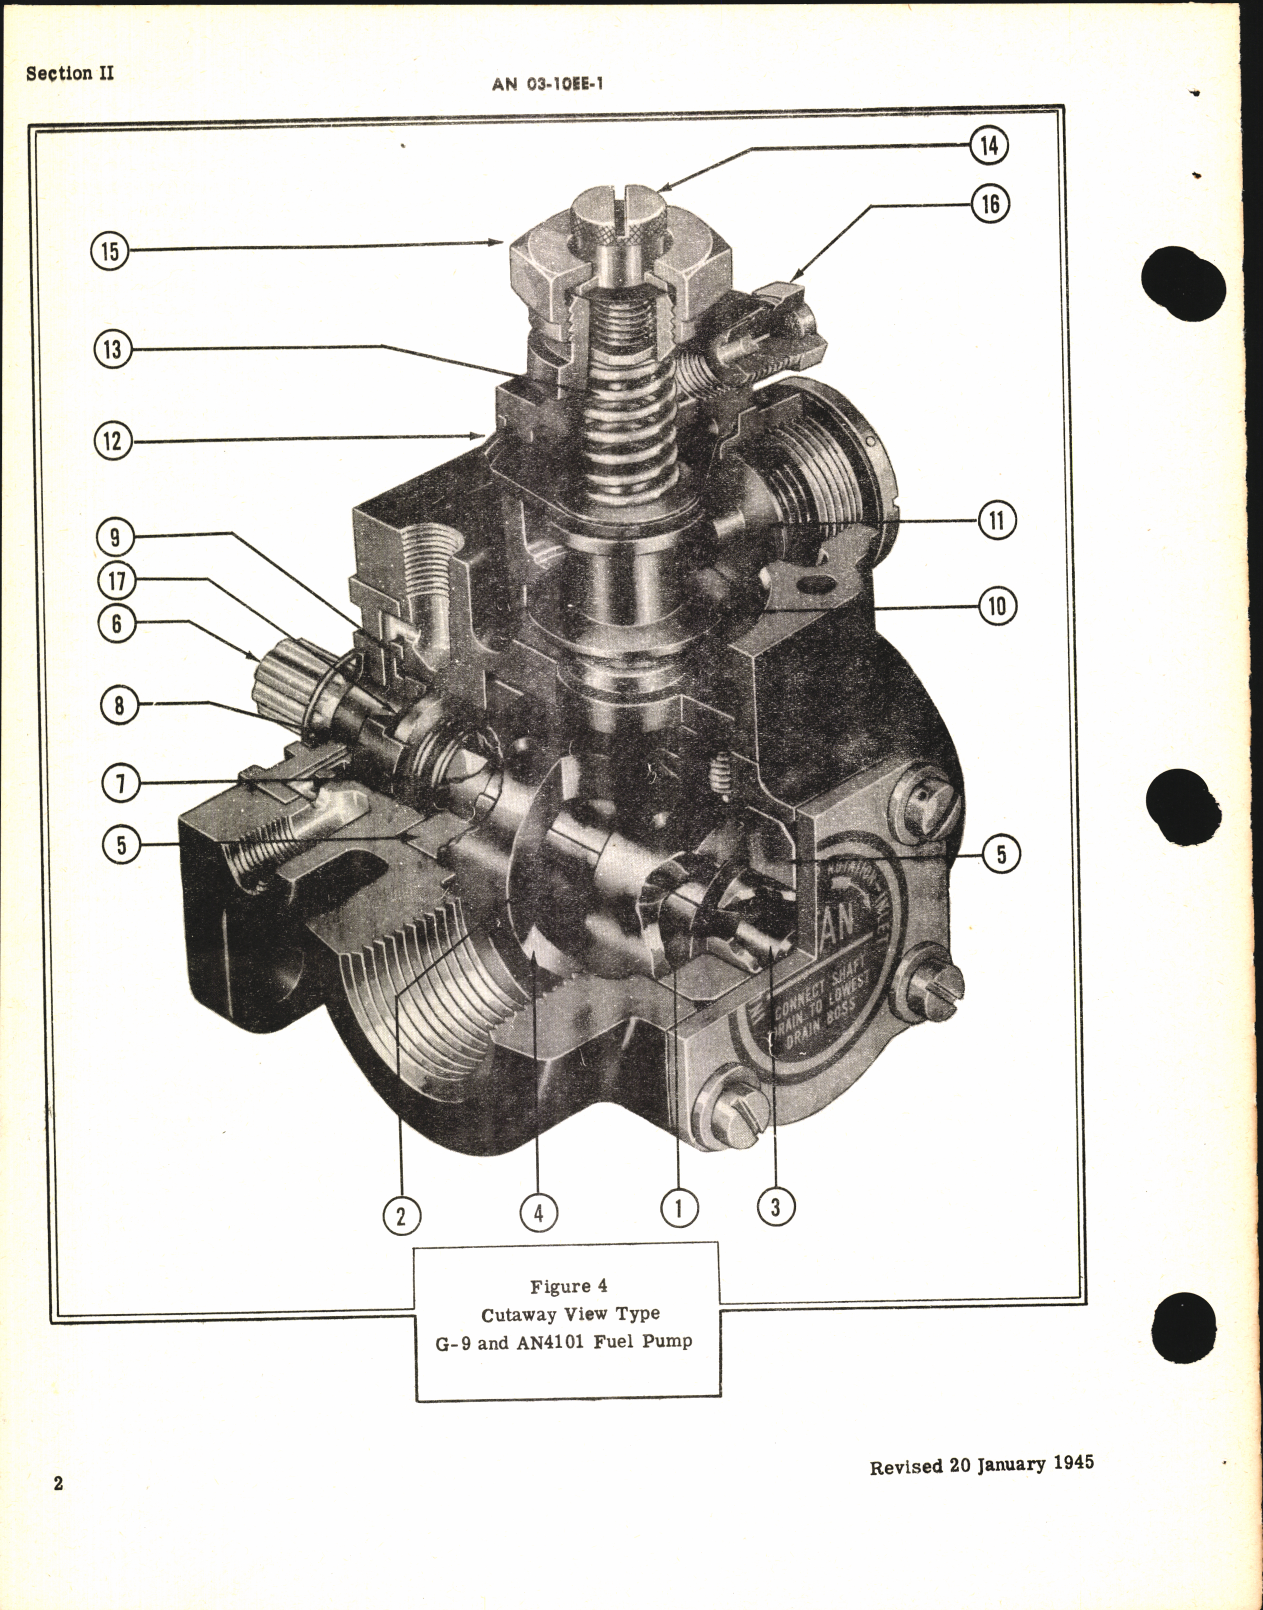 Sample page 6 from AirCorps Library document: Operation, Service, & Overhaul Instructions with Parts Catalog for Engine-Driven Fuel Pumps